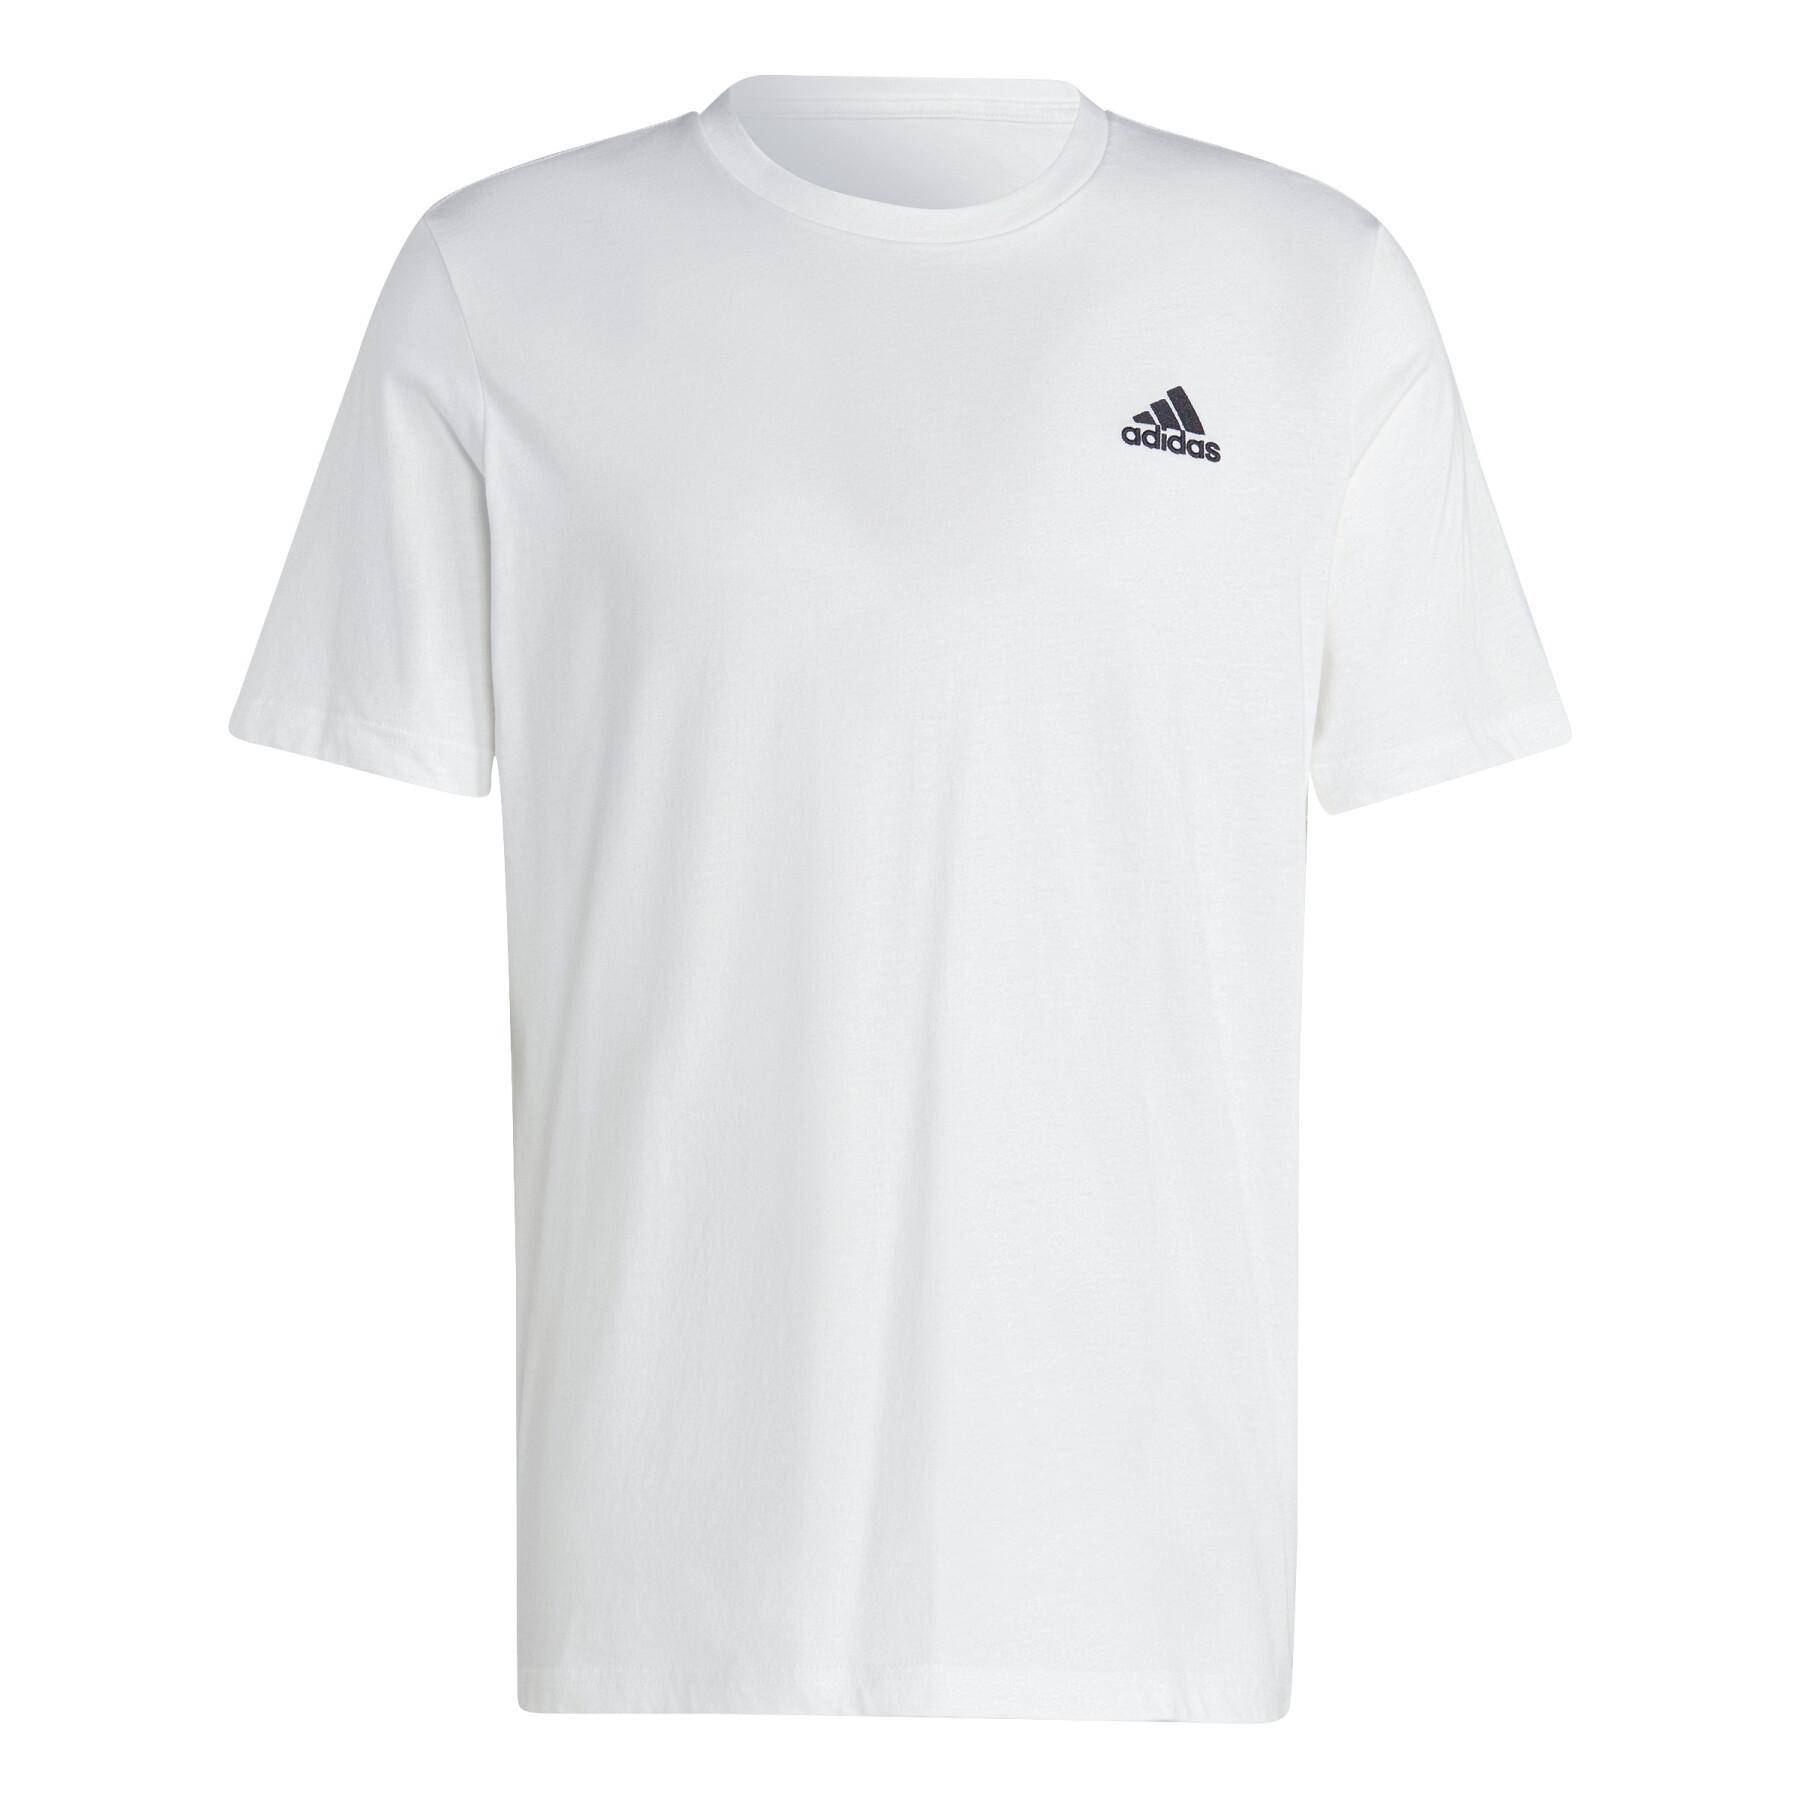 Simple embroidered small logo jersey adidas Essentials